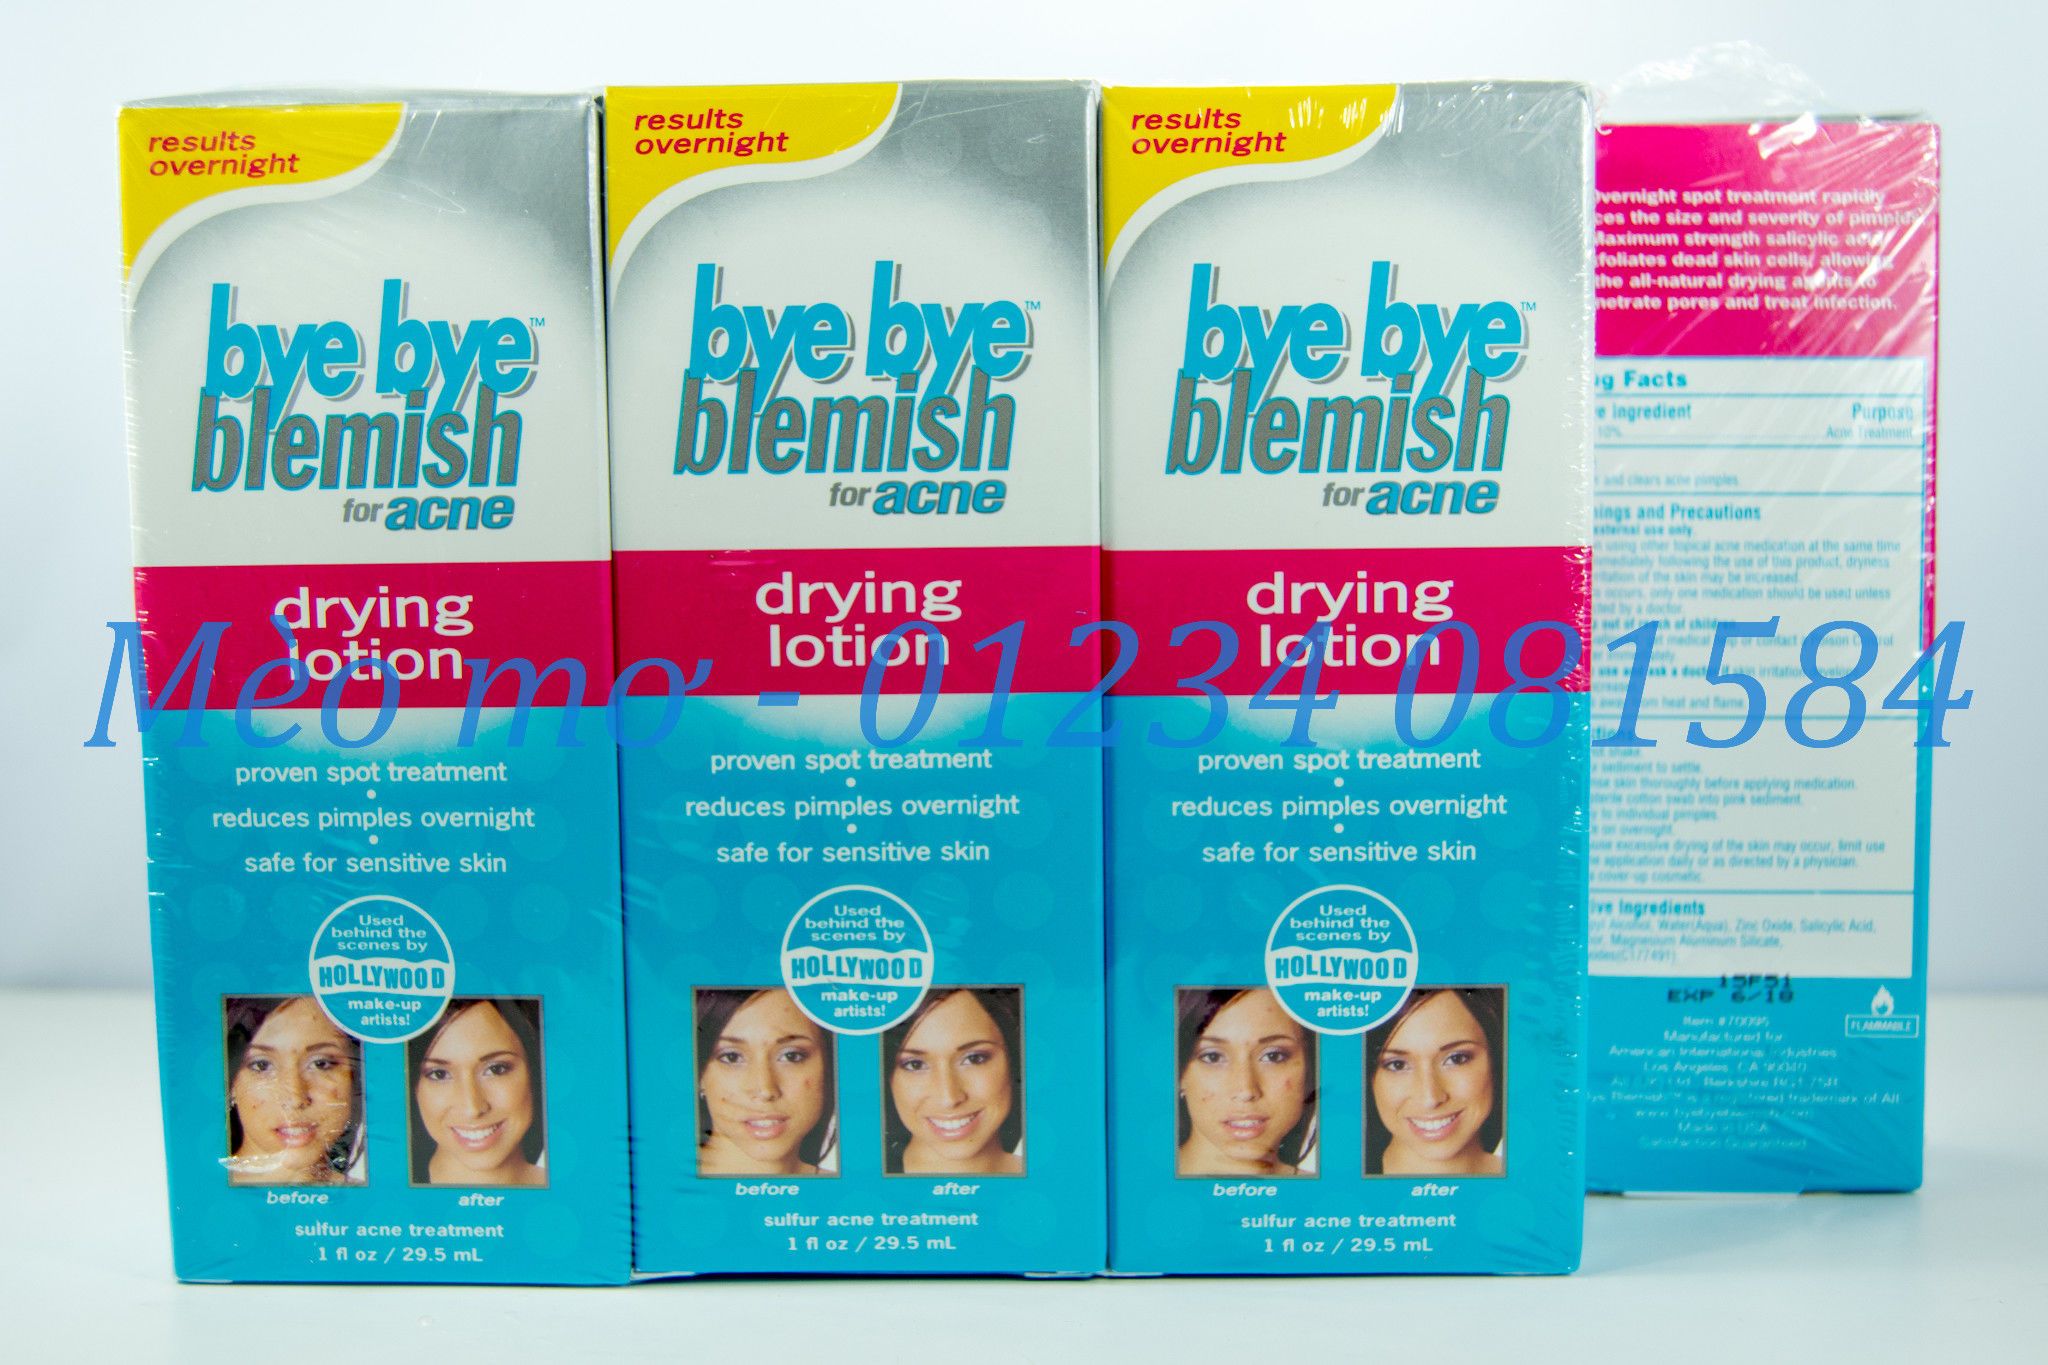 Bye Bye Blemish for acne - dry lotion -  29.5ml